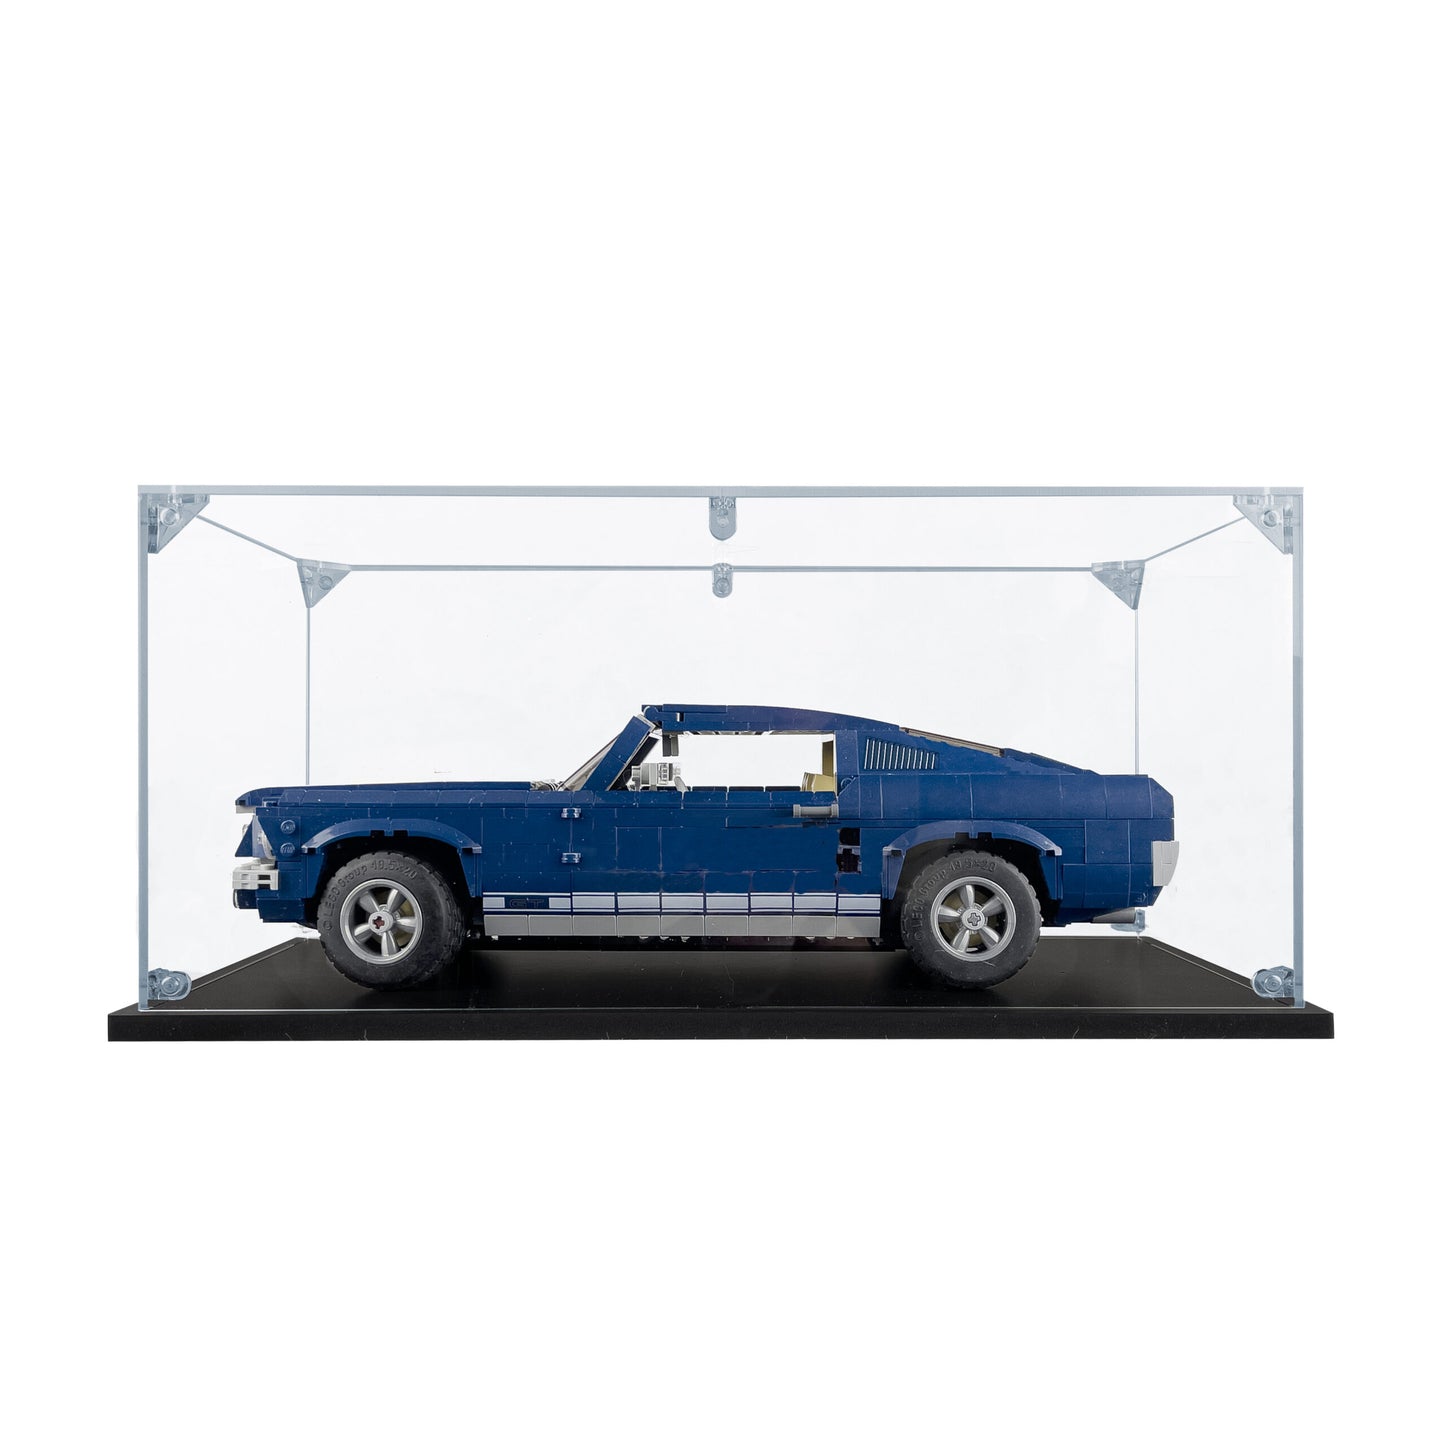 Acrylic Display Case for LEGO® Ford Mustang 10265/42138/60289/10300